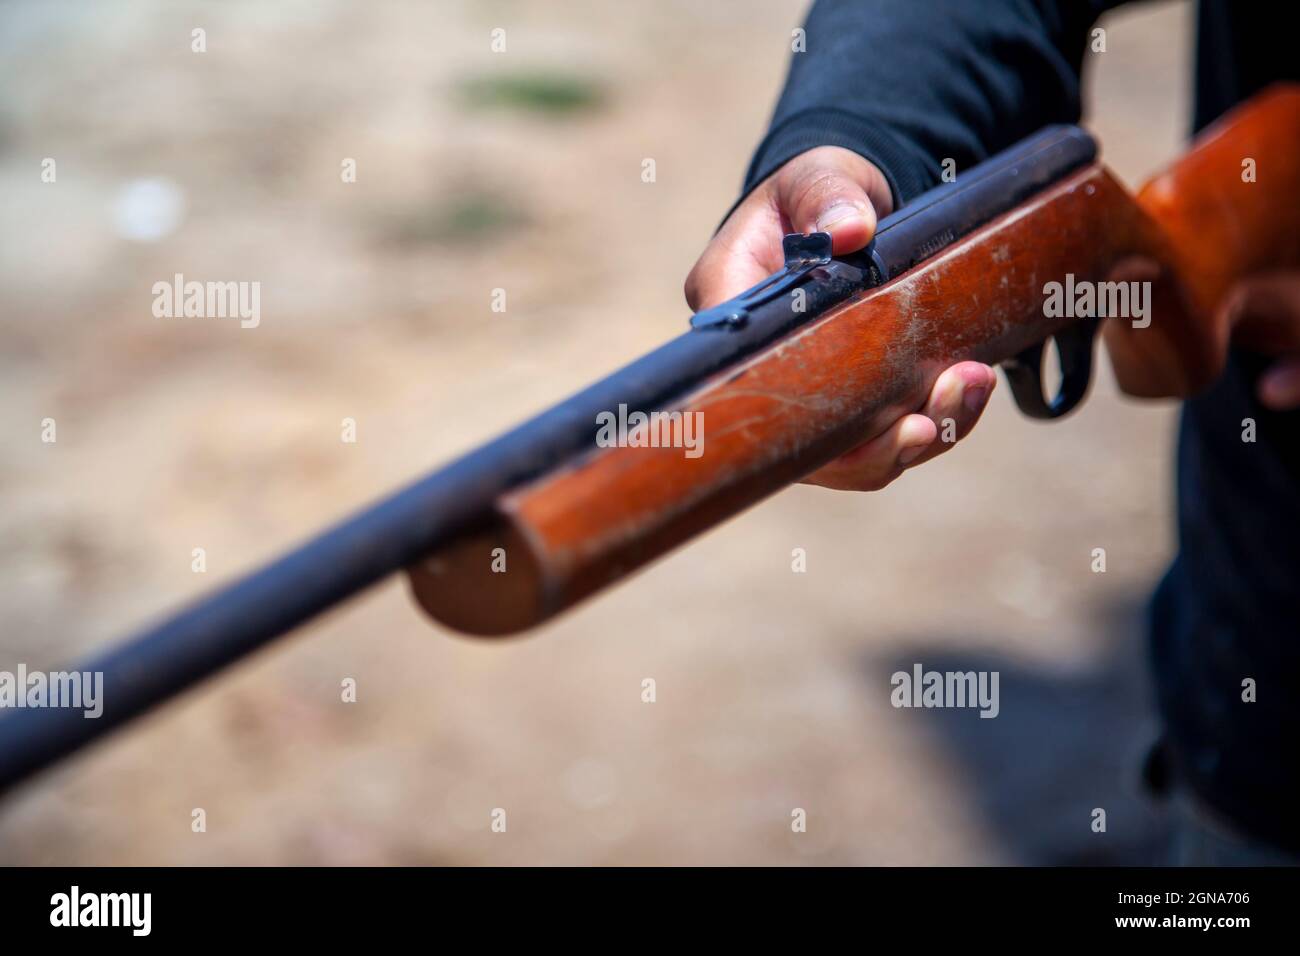 person holding an old vintage gun made of wood Stock Photo